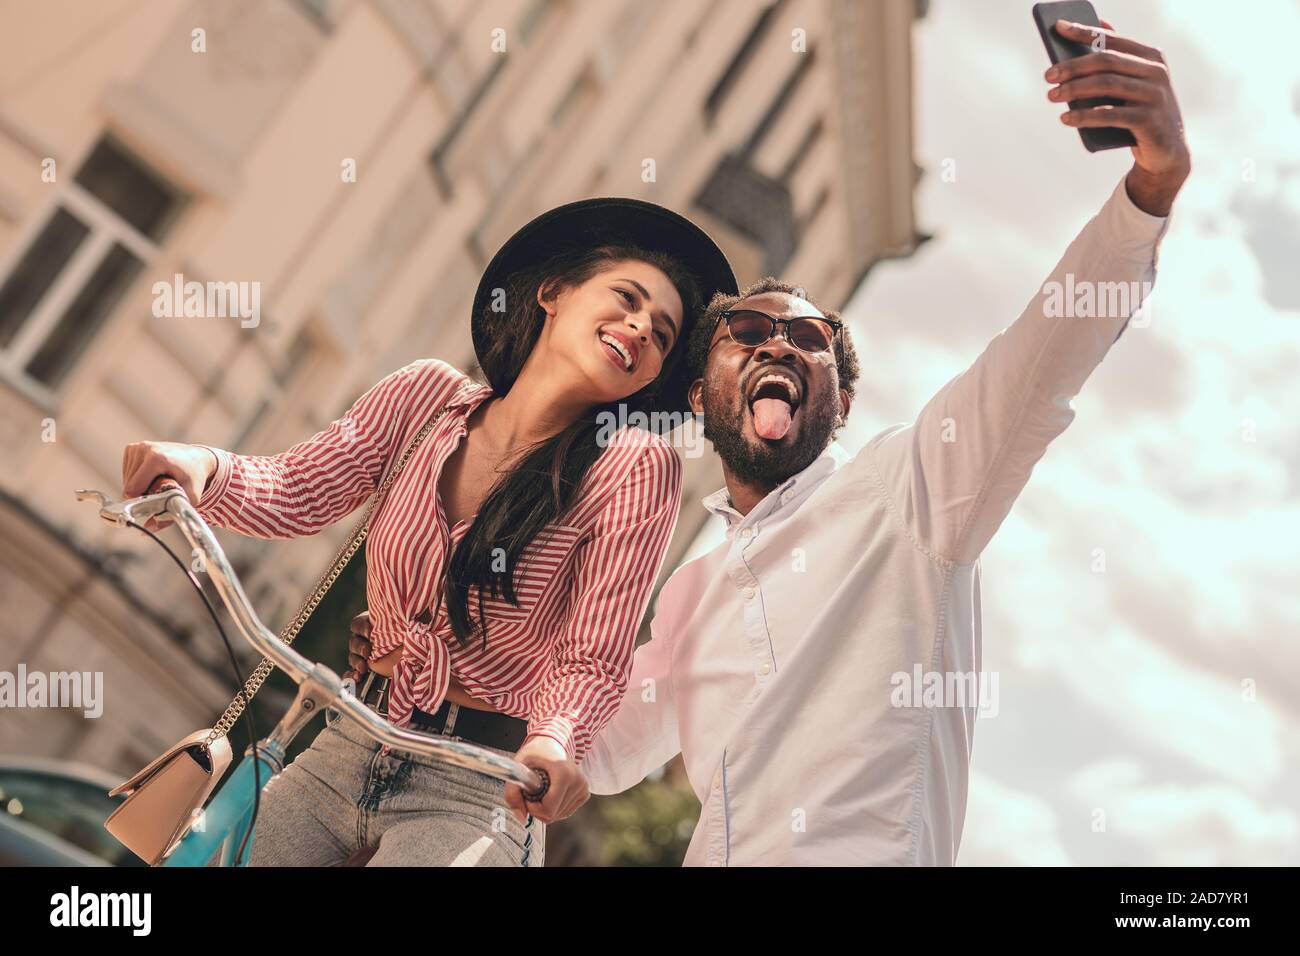 Showing tongue for funny selfie stock photo Stock Photo